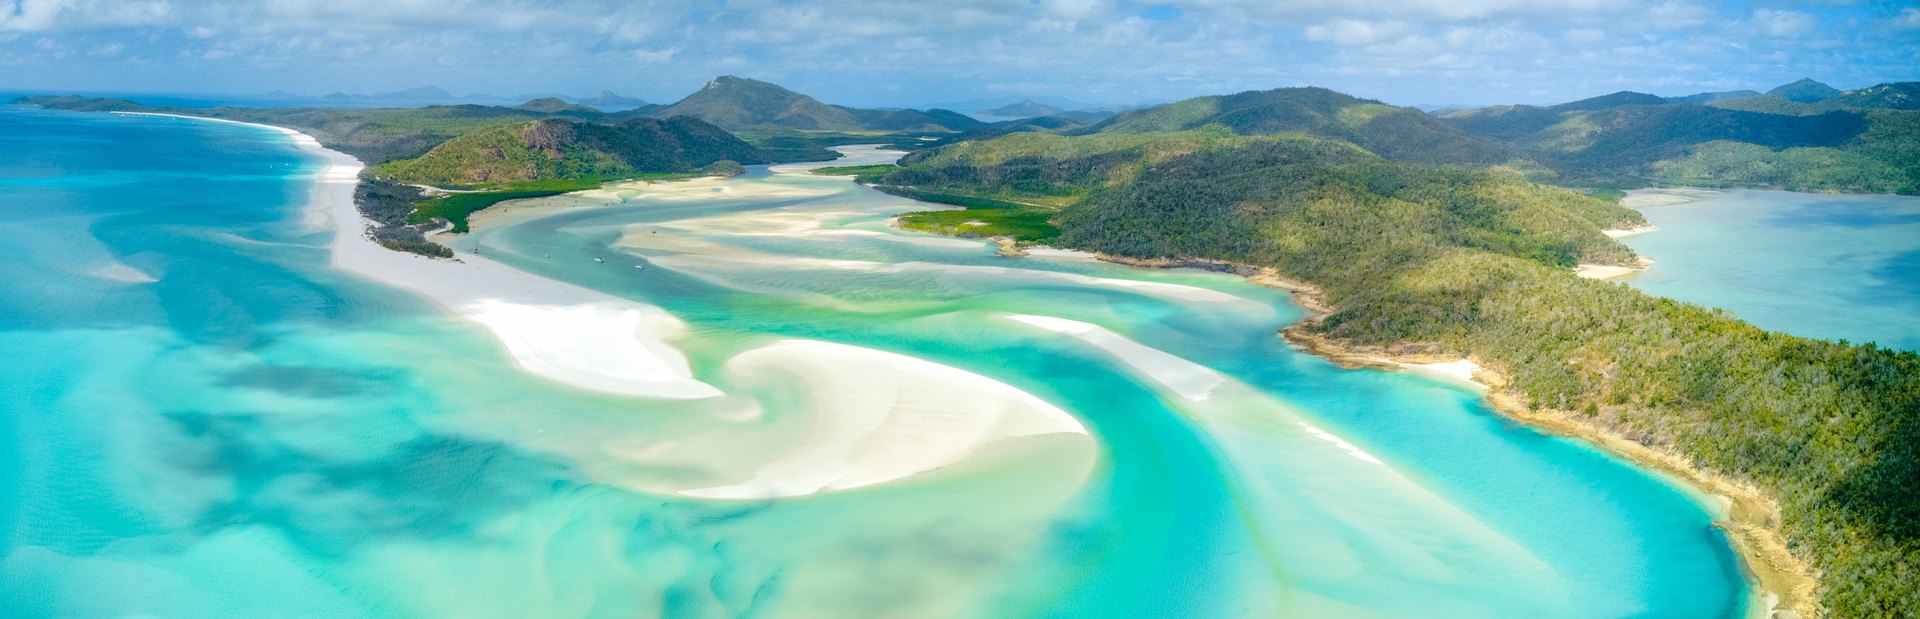 Best by boat: Where to visit on a Whitsundays yacht charter